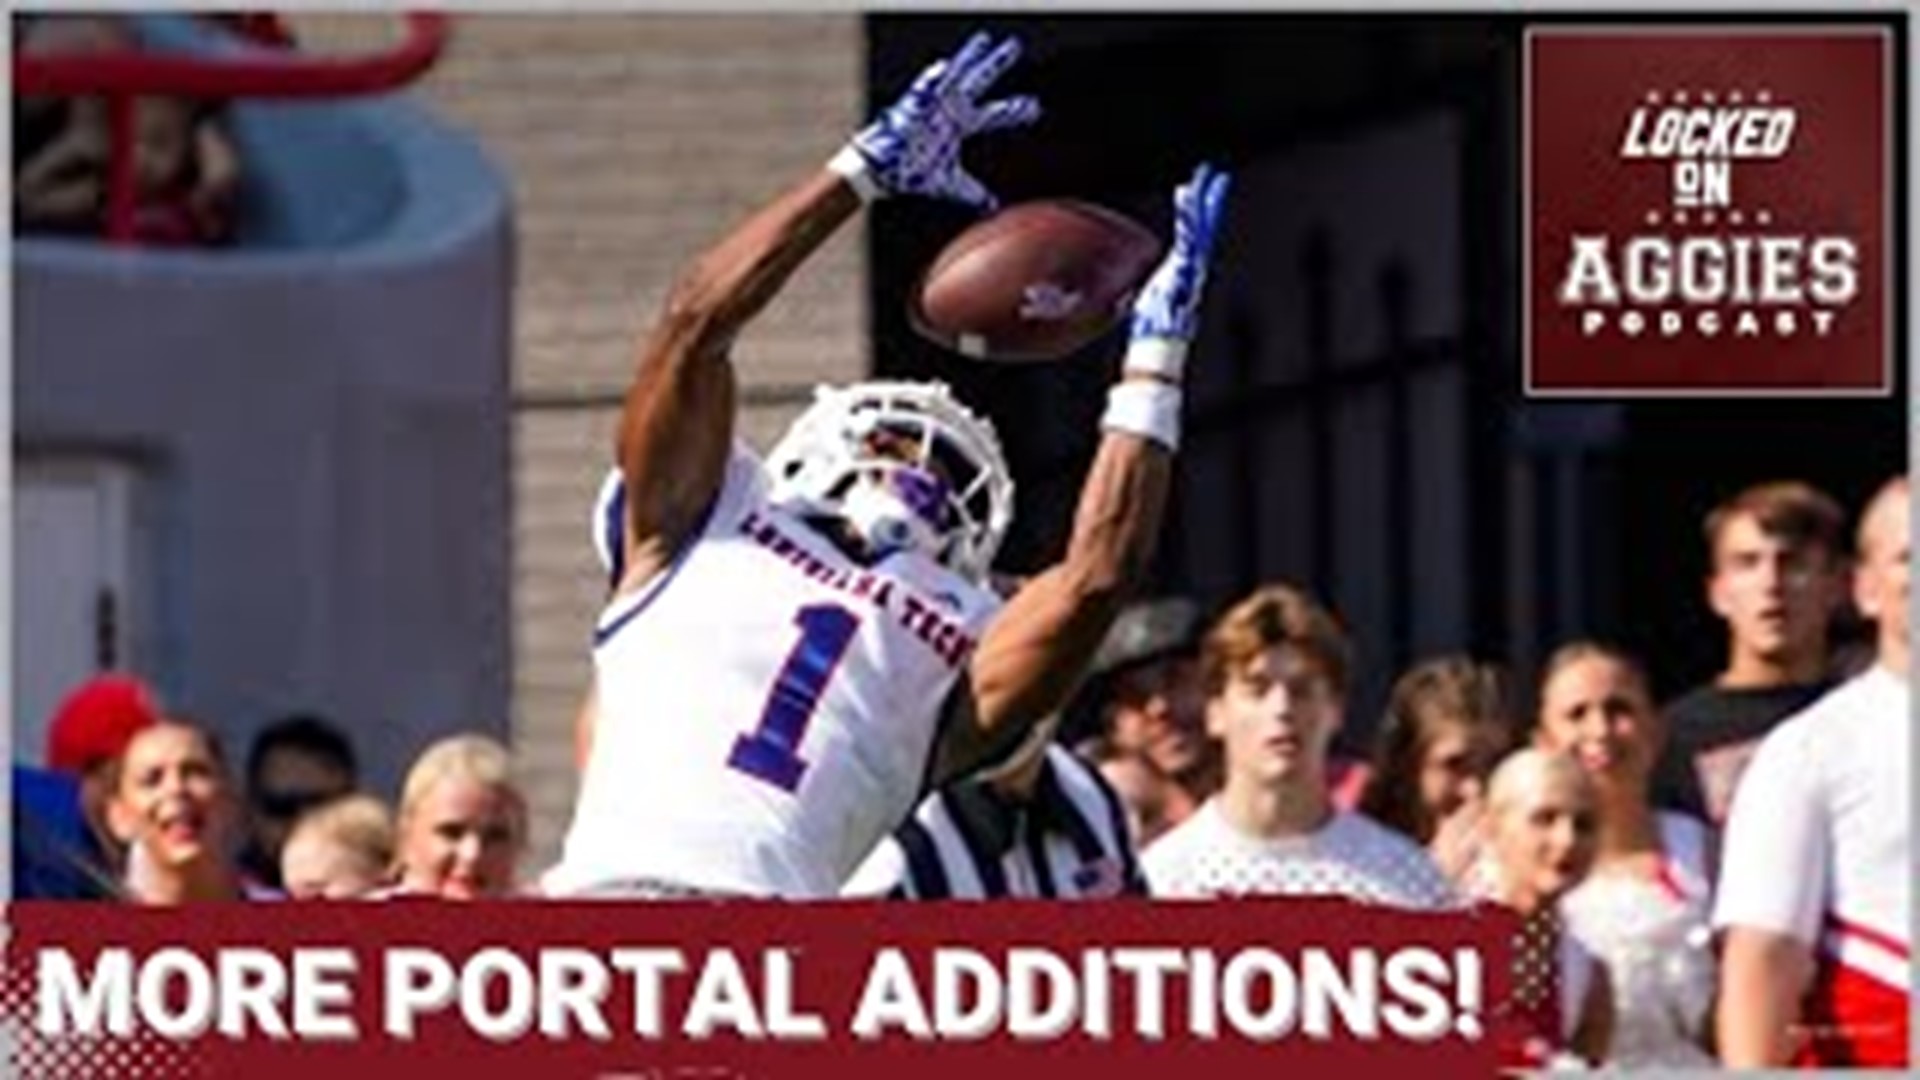 On today's episode of Locked On Aggies host Andrew Stefaniak talks about how Texas A&M added wide receiver Cyrus Allen from Louisiana Tech and linebacker Alex Howard